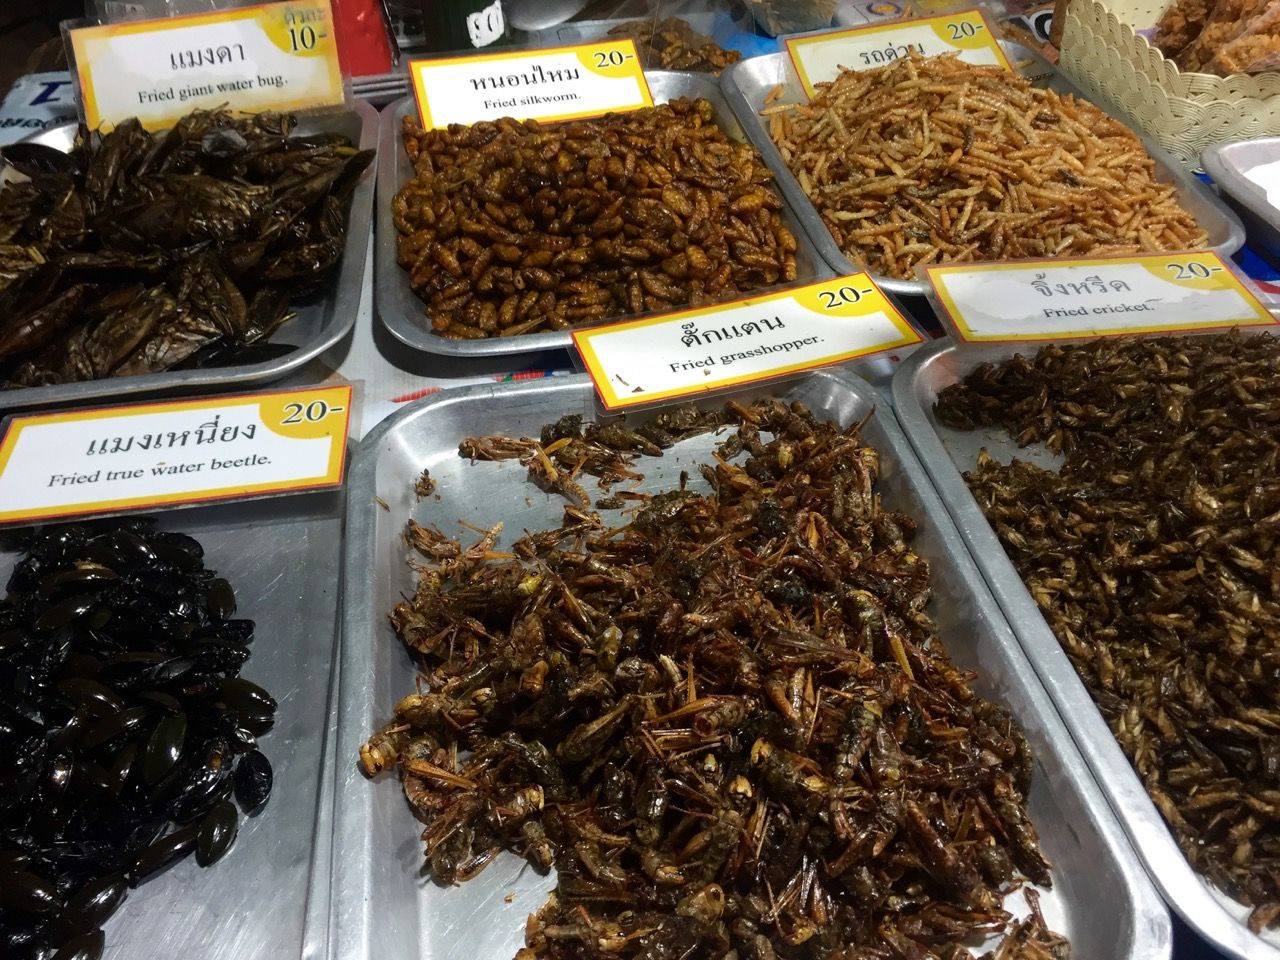 Fried insects and worms at the Sunday market.